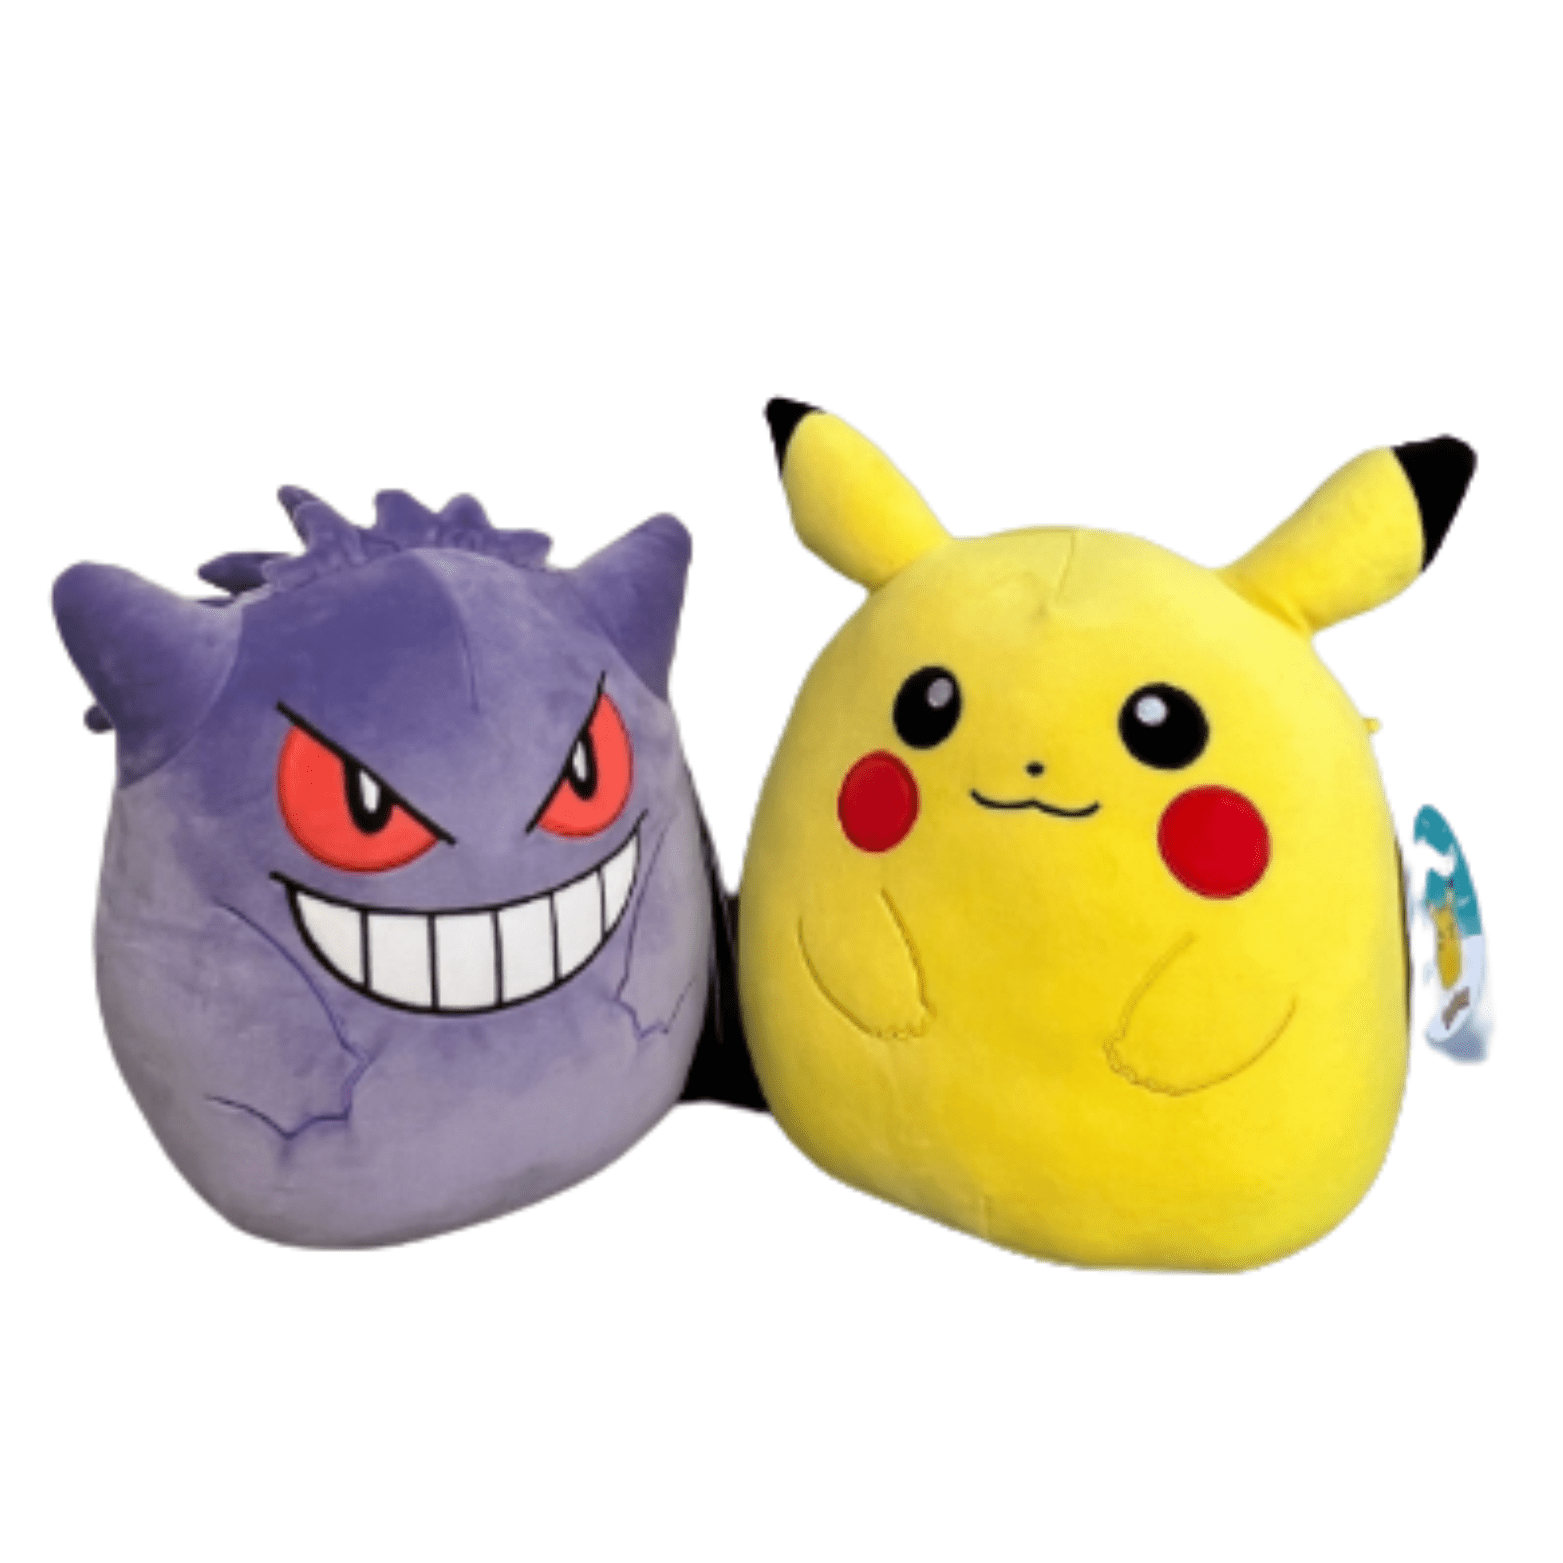 Pokémon Squishmallows are now back in stock!